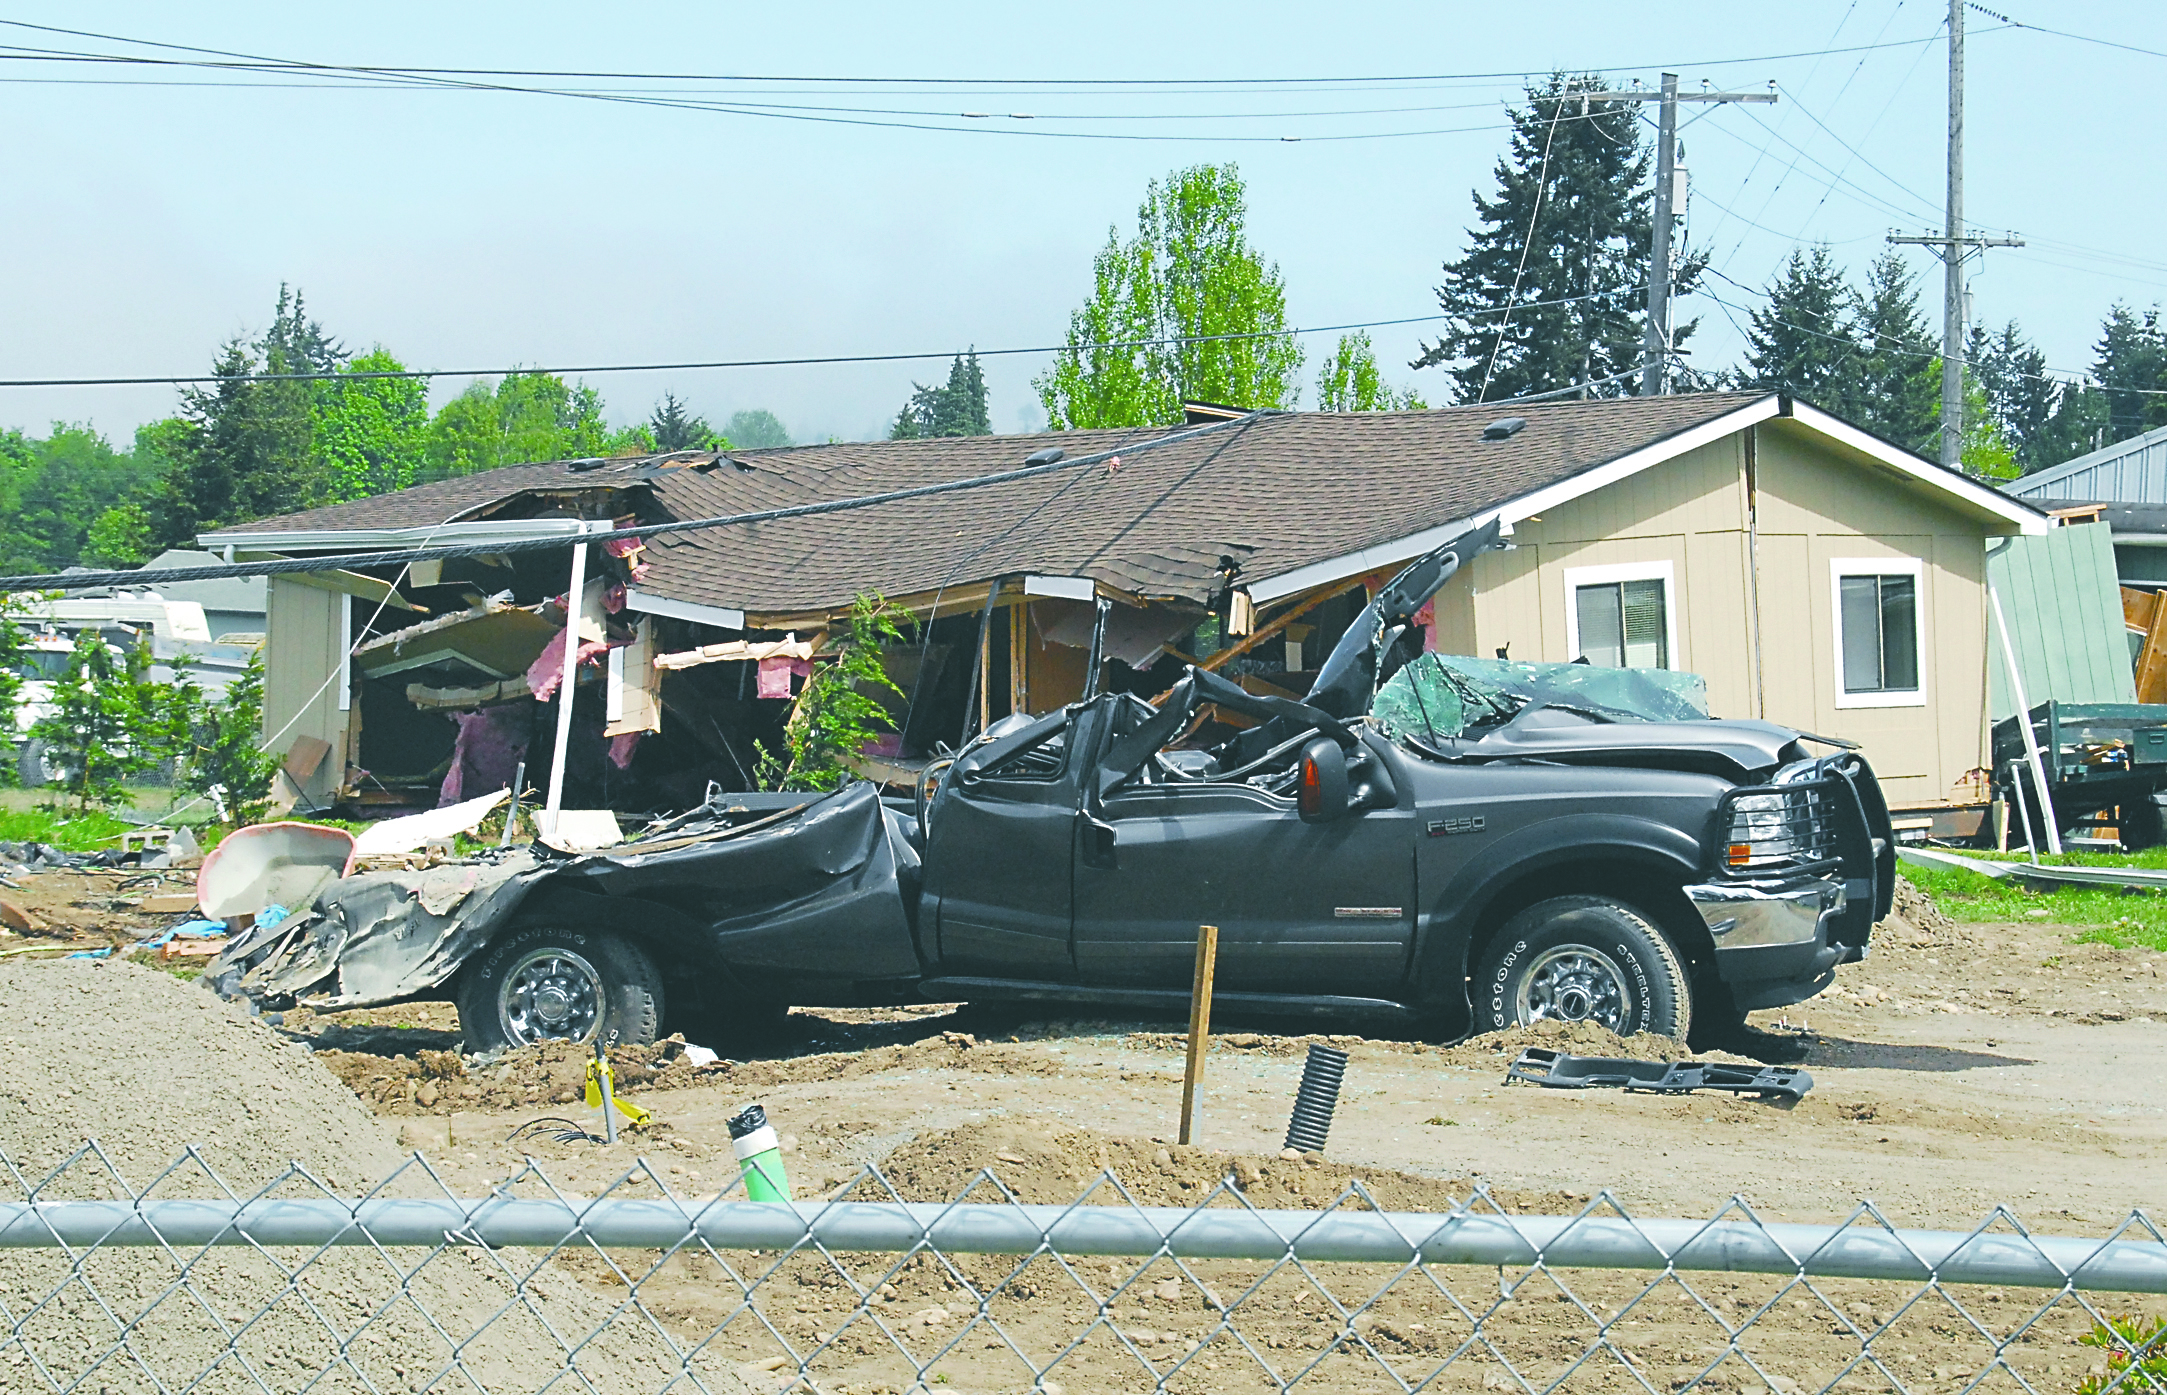 A crushed truck and a house knocked off its foundation sit as part of the aftermath of a rampage by a man driving a logging bulldozer on Friday in the Gales Addition east of Port Angeles.  Click on "Related Photos" icon below to see more photos. Keith Thorpe/Peninsula Daily News (Click to enlarge)